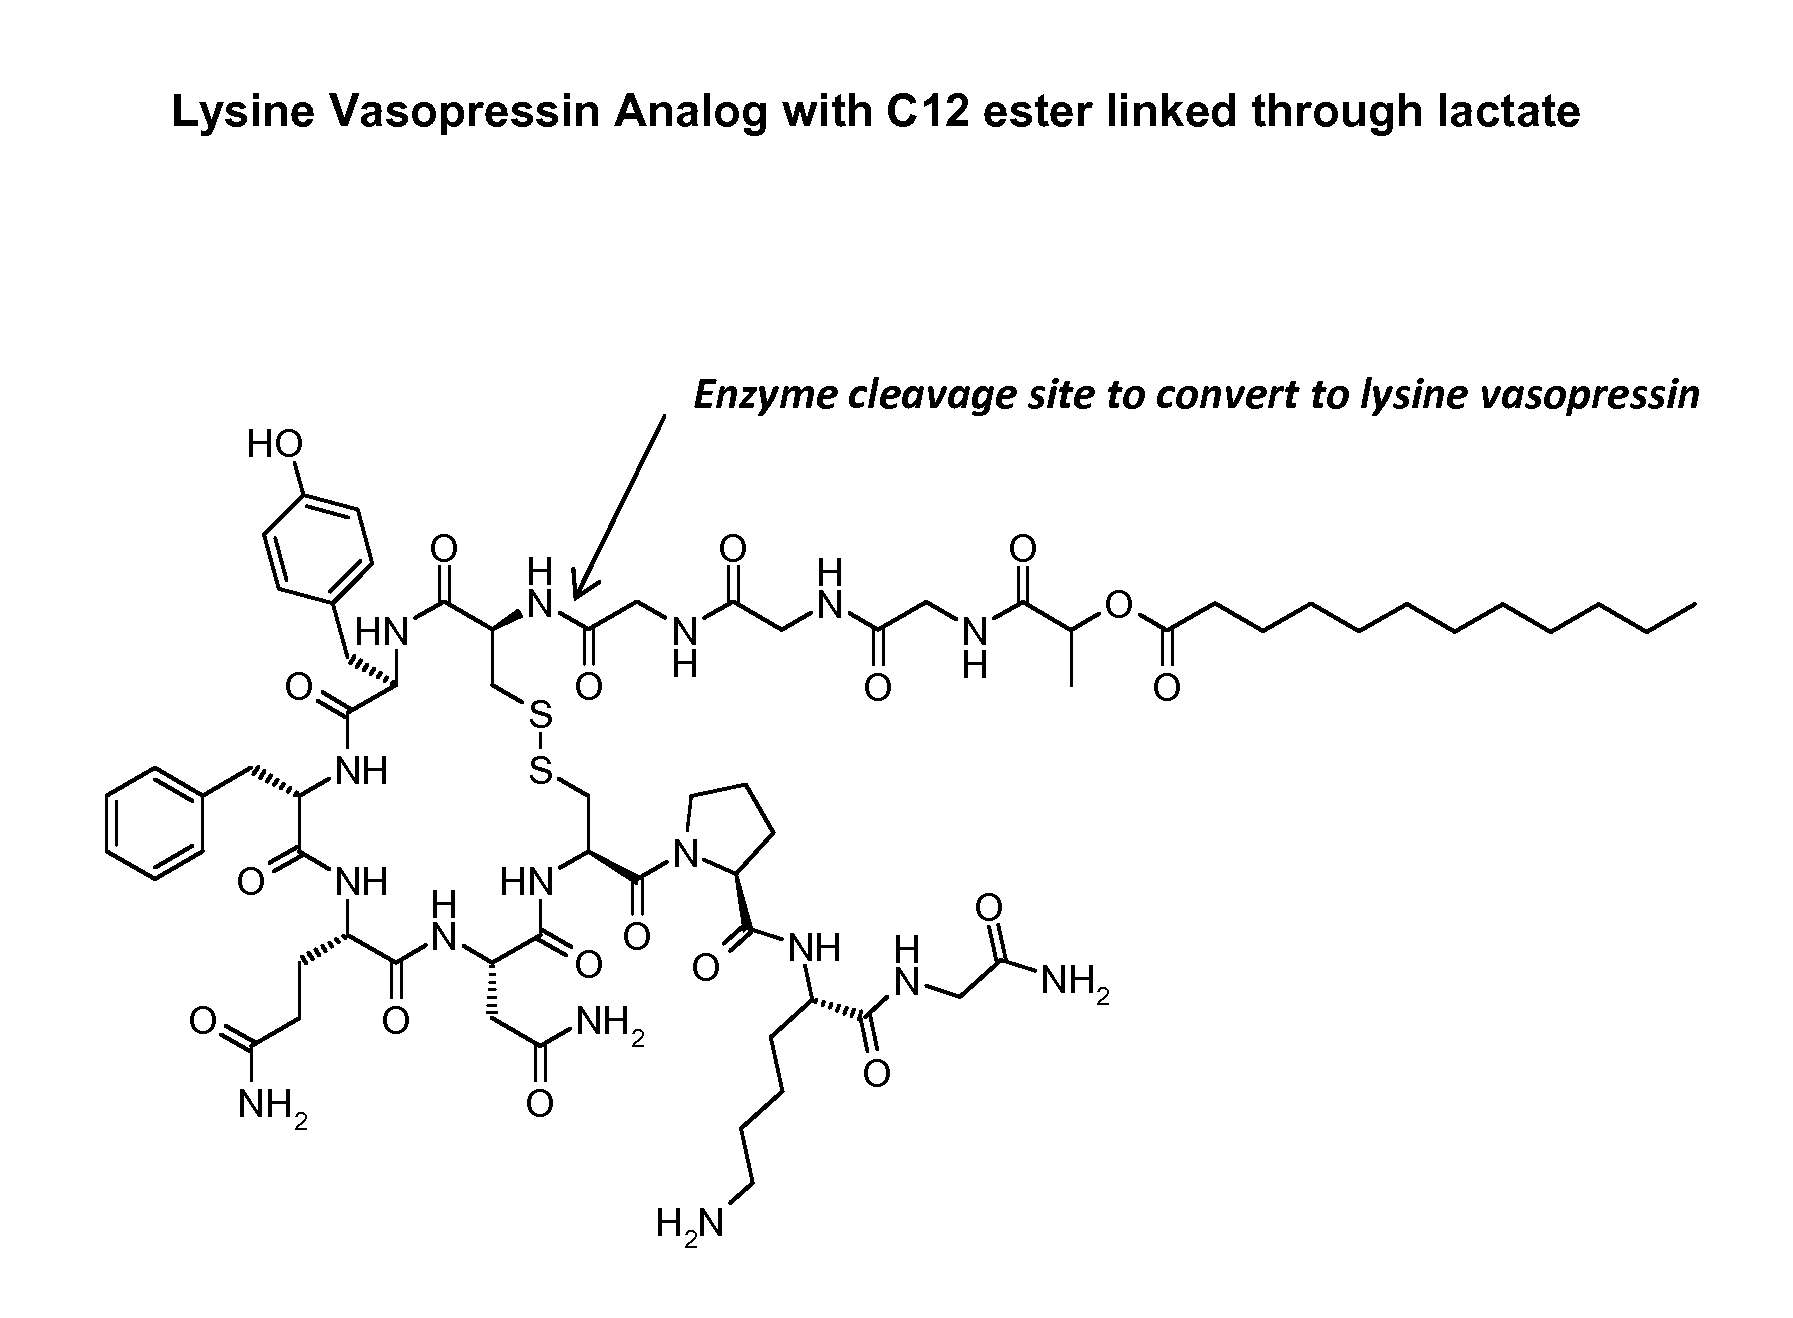 Composition for long-acting peptide analogs